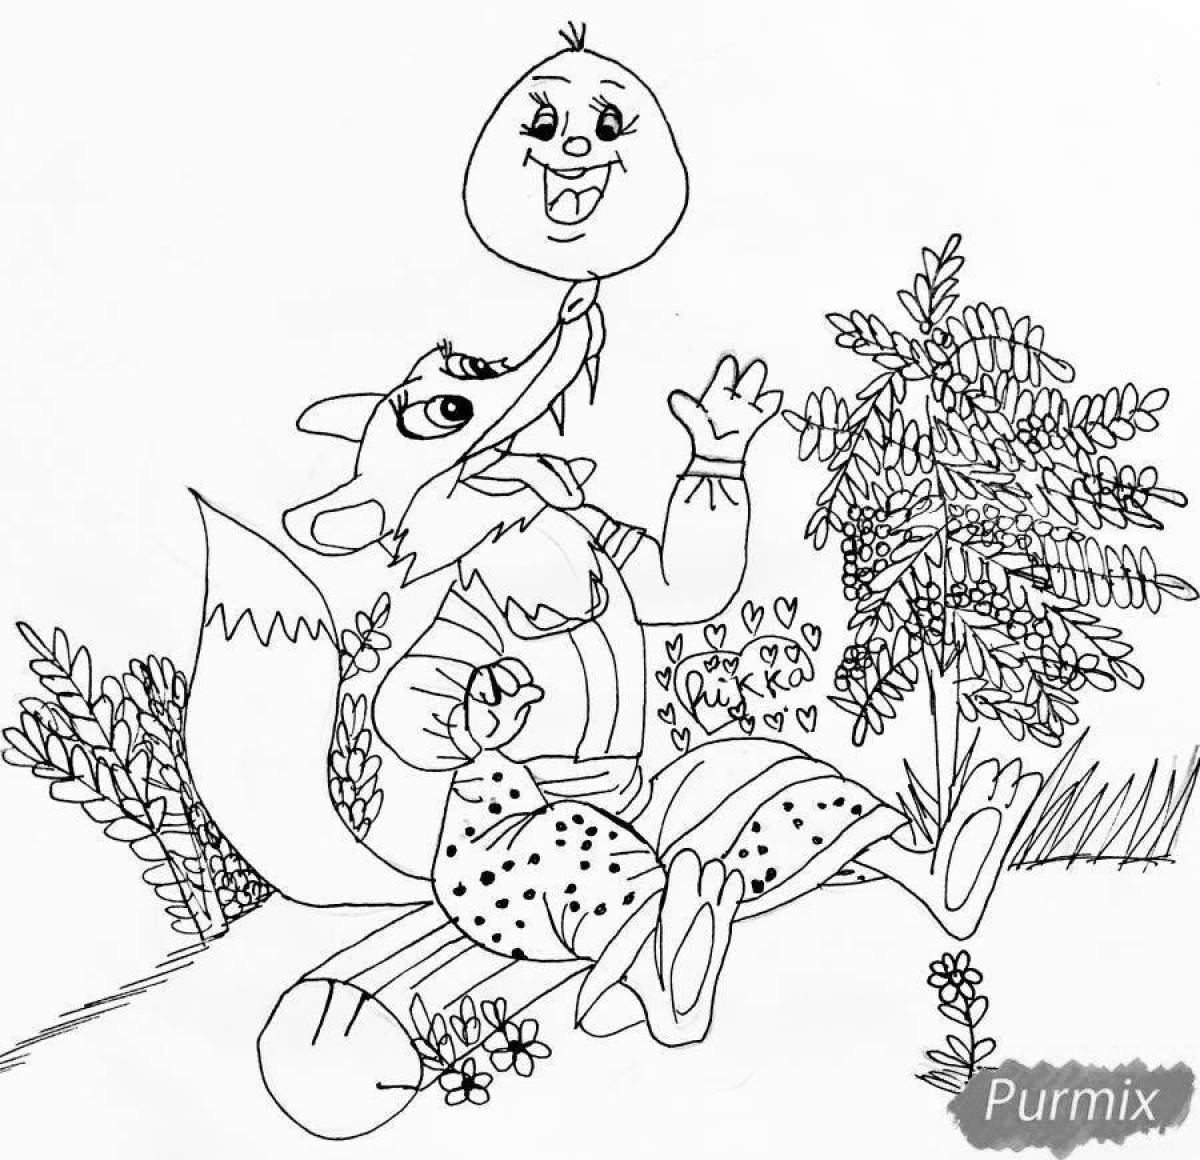 Coloring book bright fox and rabbit